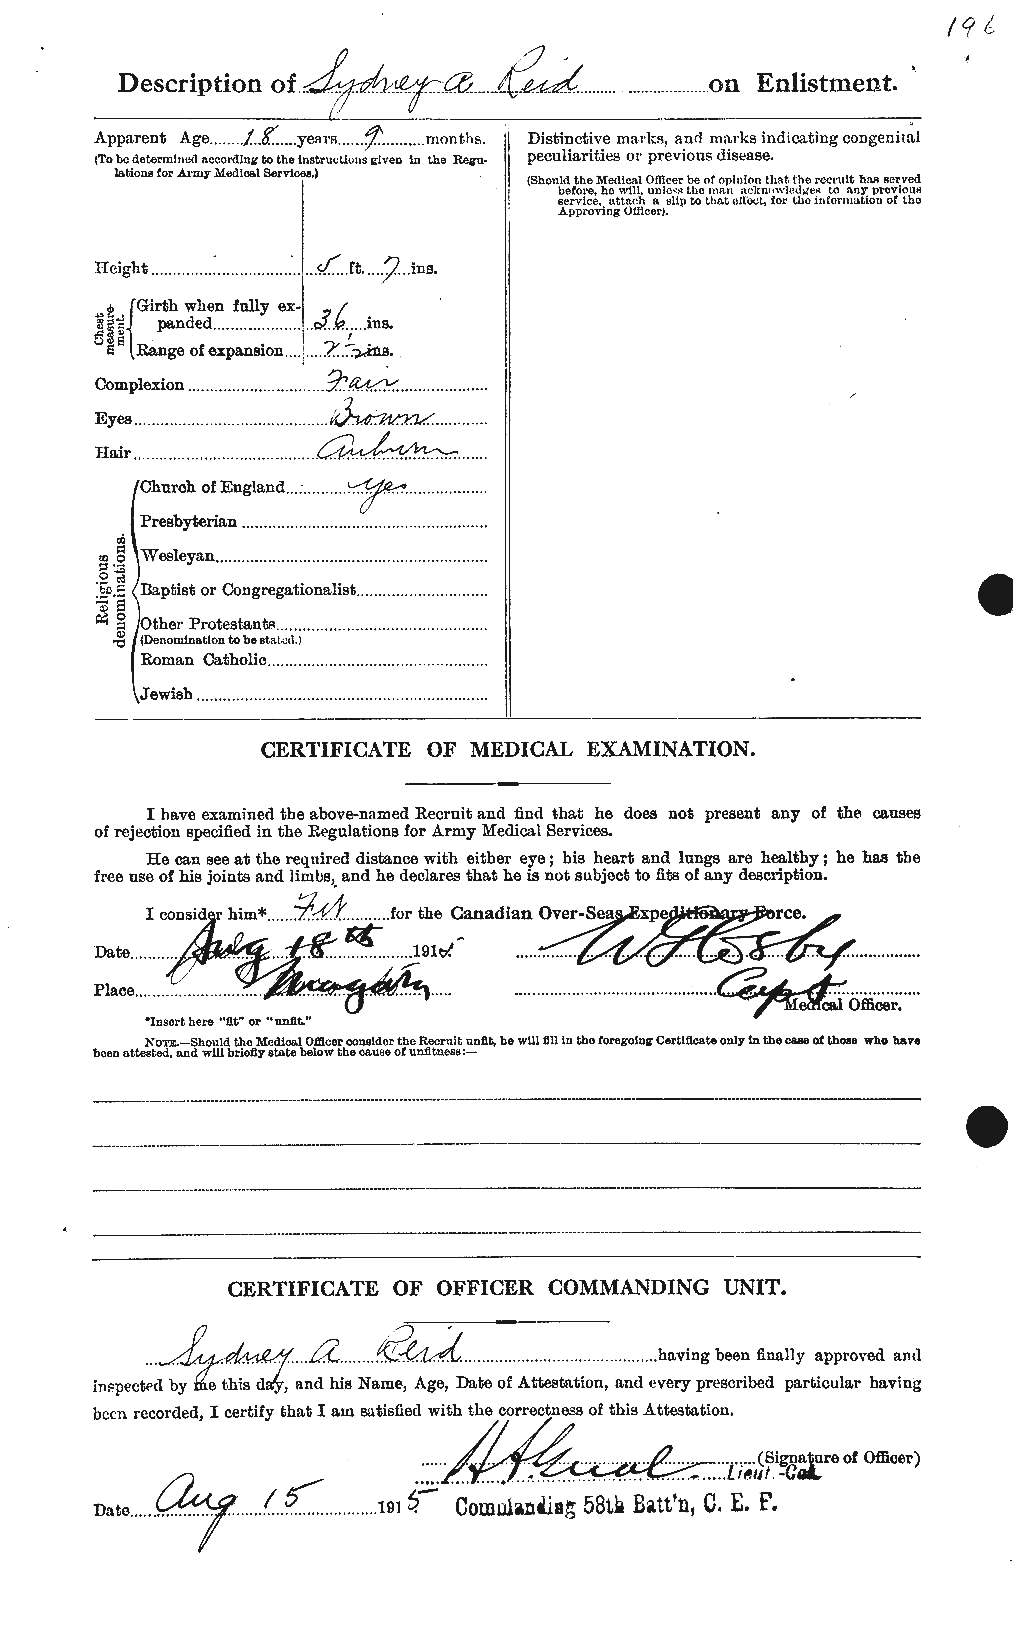 Personnel Records of the First World War - CEF 601975b